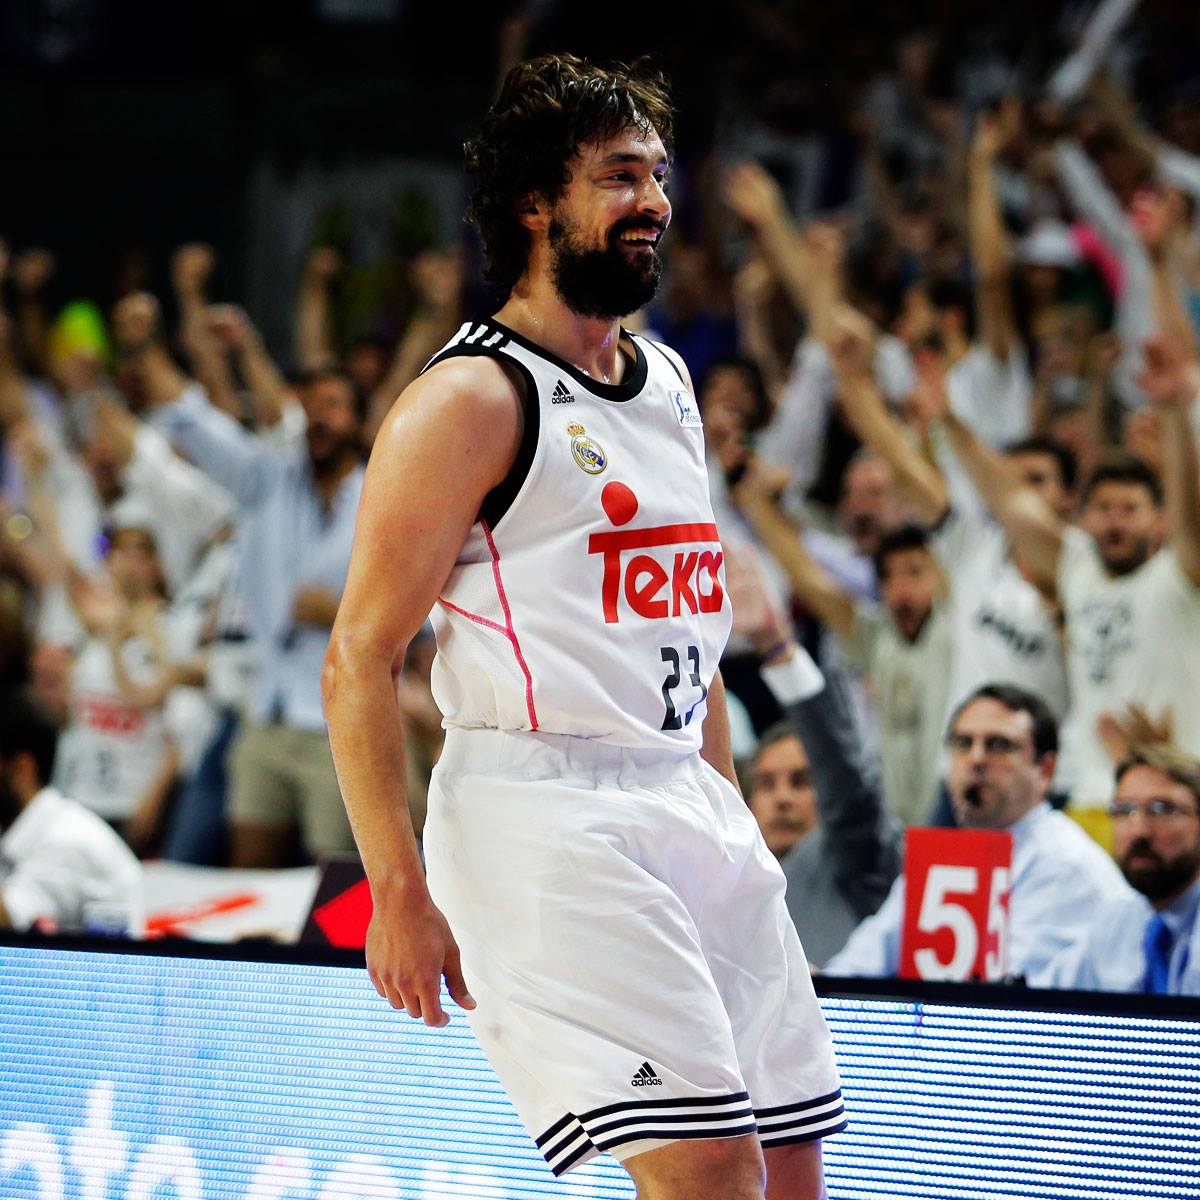 Llull's versatility makes him appealing to the Rockets BallinEurope